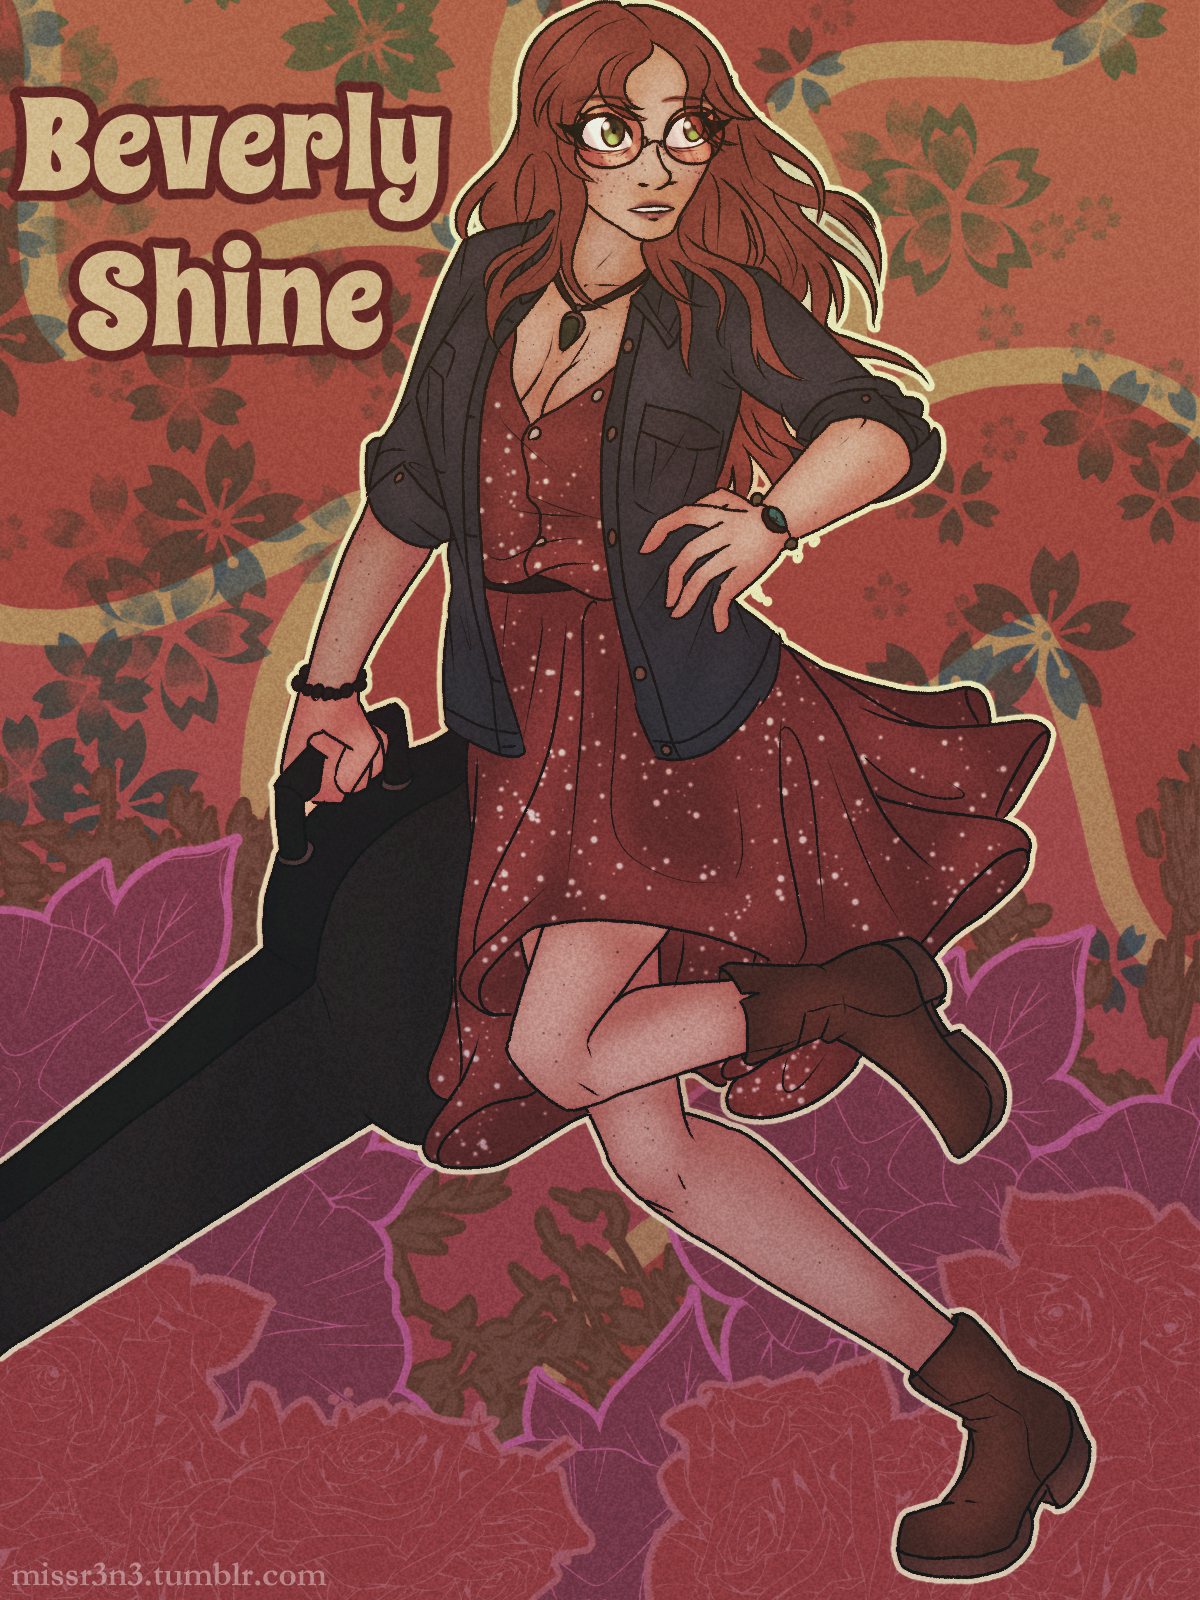 a hippie woman with ginger hair, round glasses, and freckles runs with carrying a guitar case. the background is typical 70s graphic design. text beside the woman reads 'Beverly Shine'